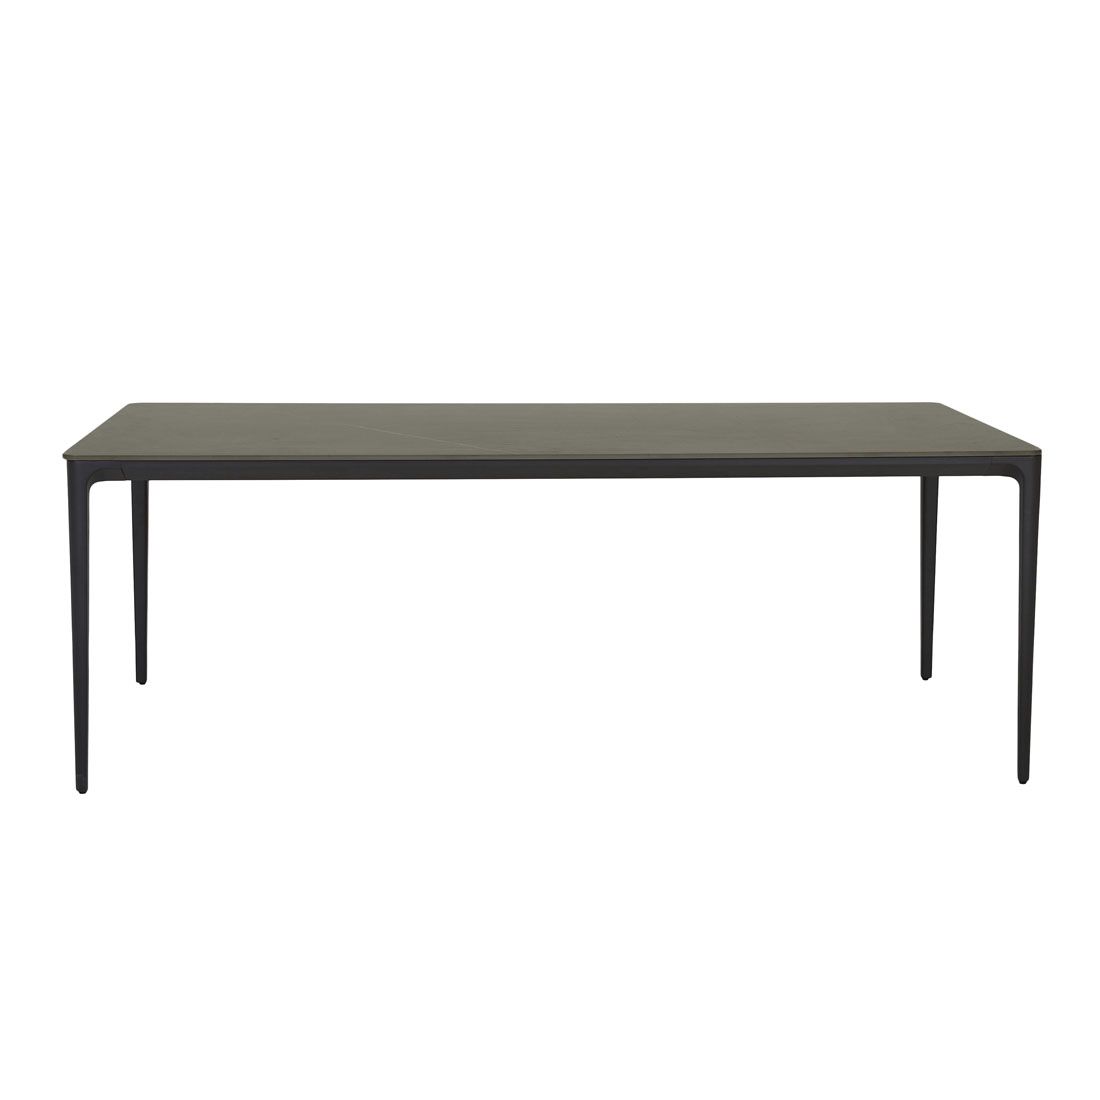 Portsea Classic Dining Tables